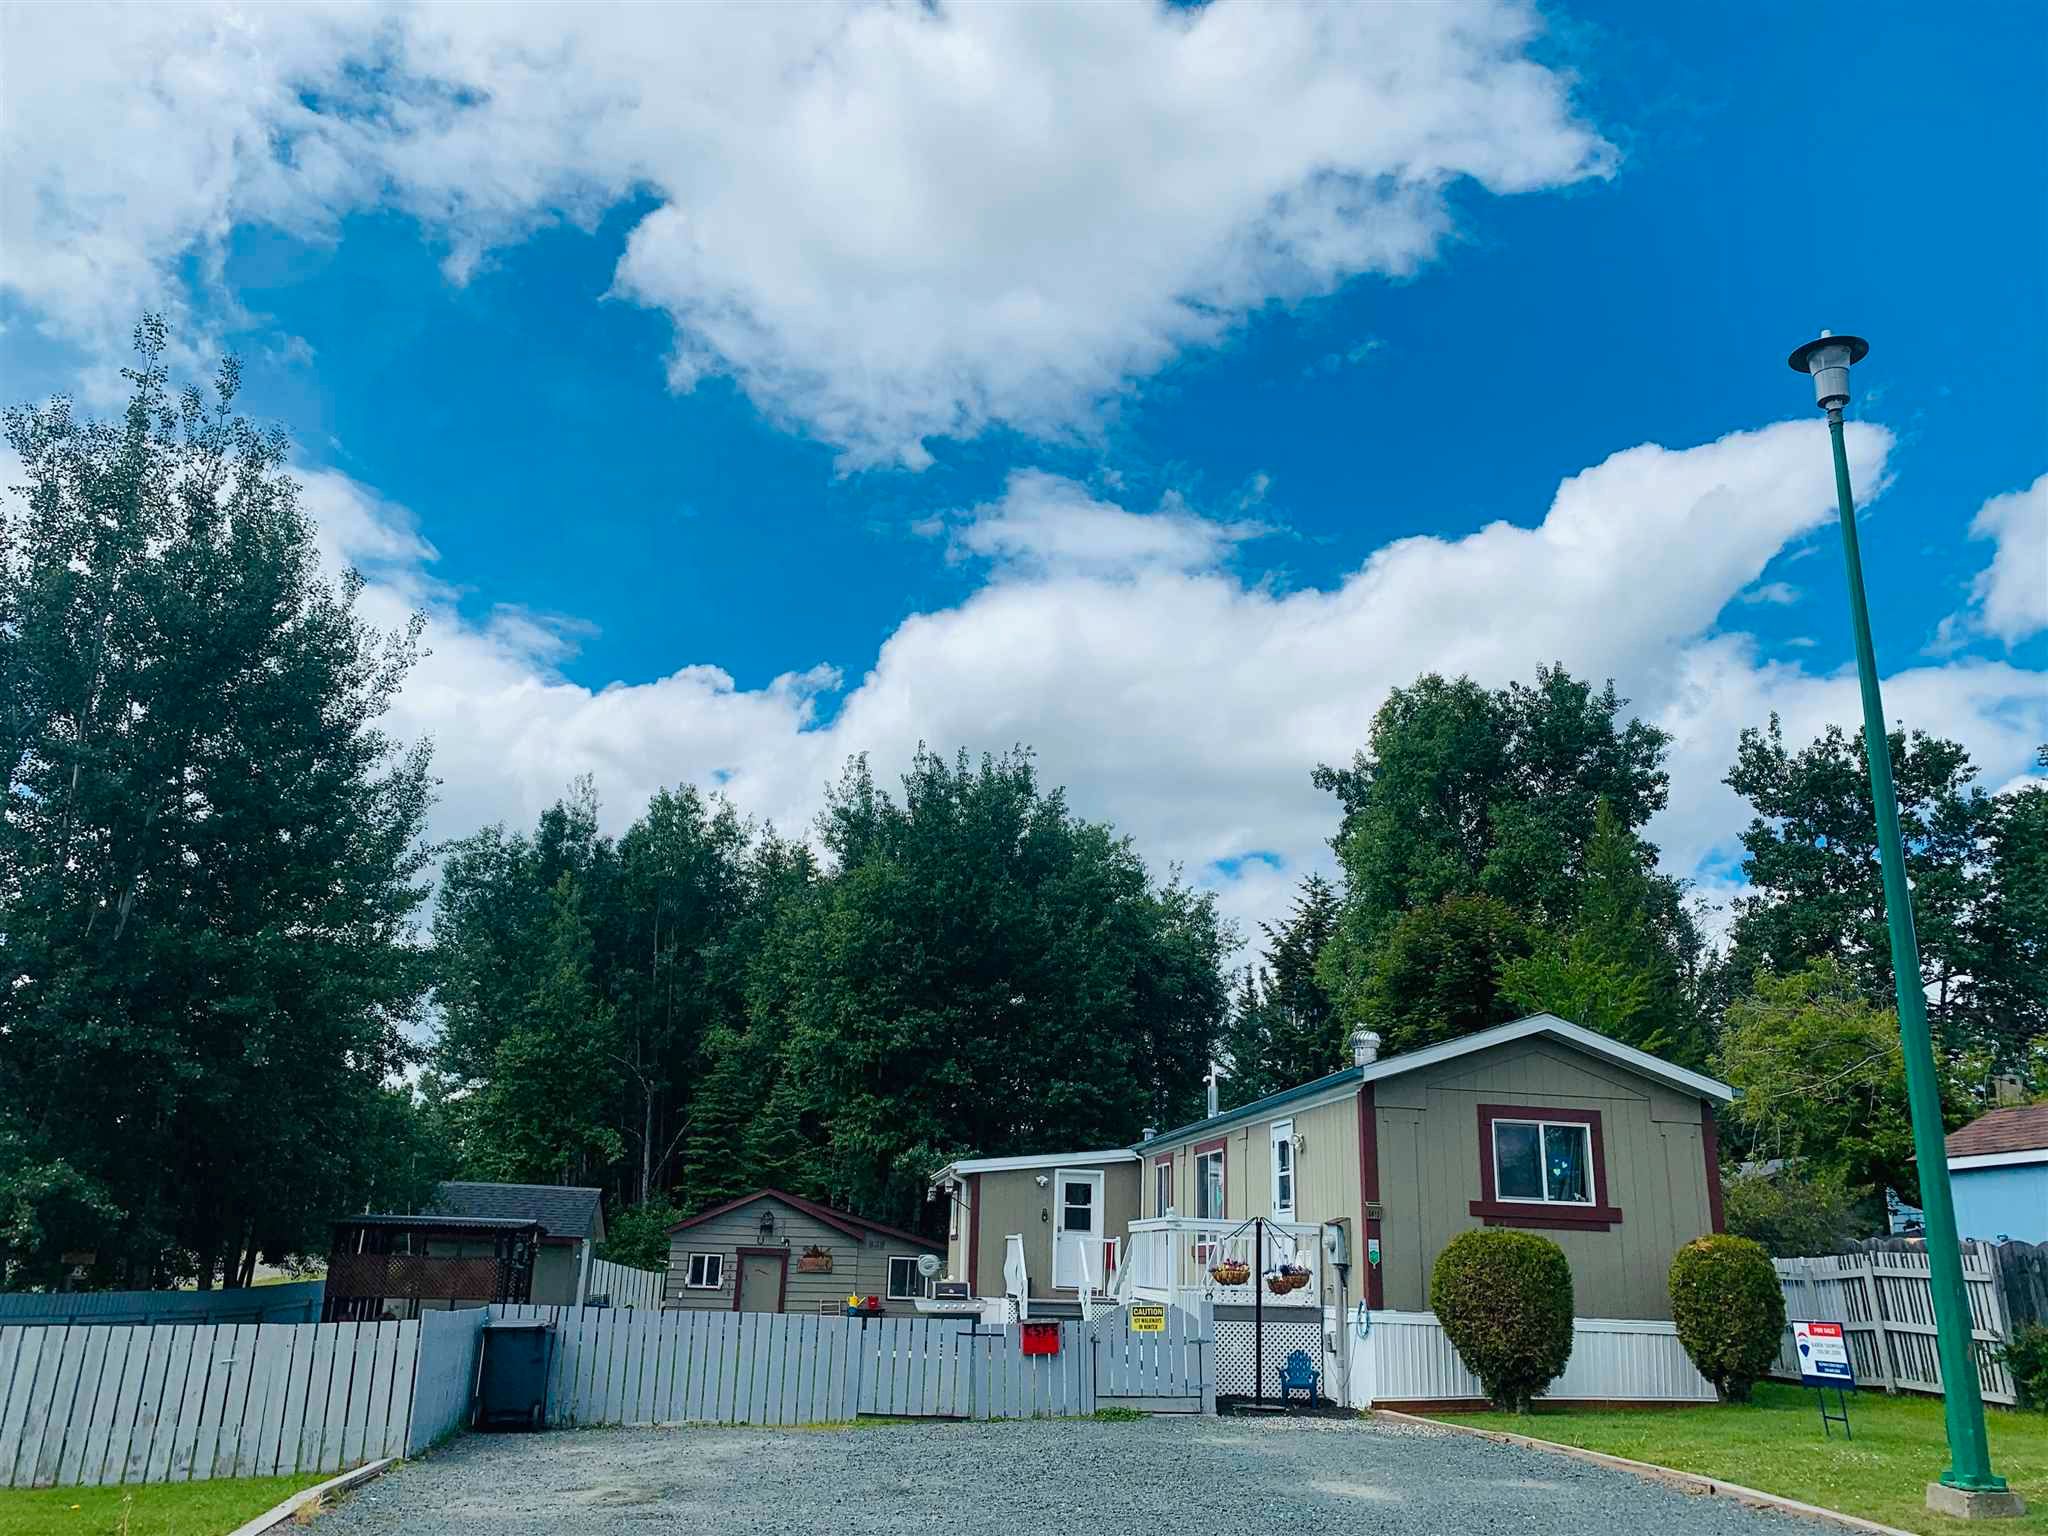 Main Photo: 6615 DRIFTWOOD Road in Prince George: Valleyview Manufactured Home for sale (PG City North (Zone 73))  : MLS®# R2594571